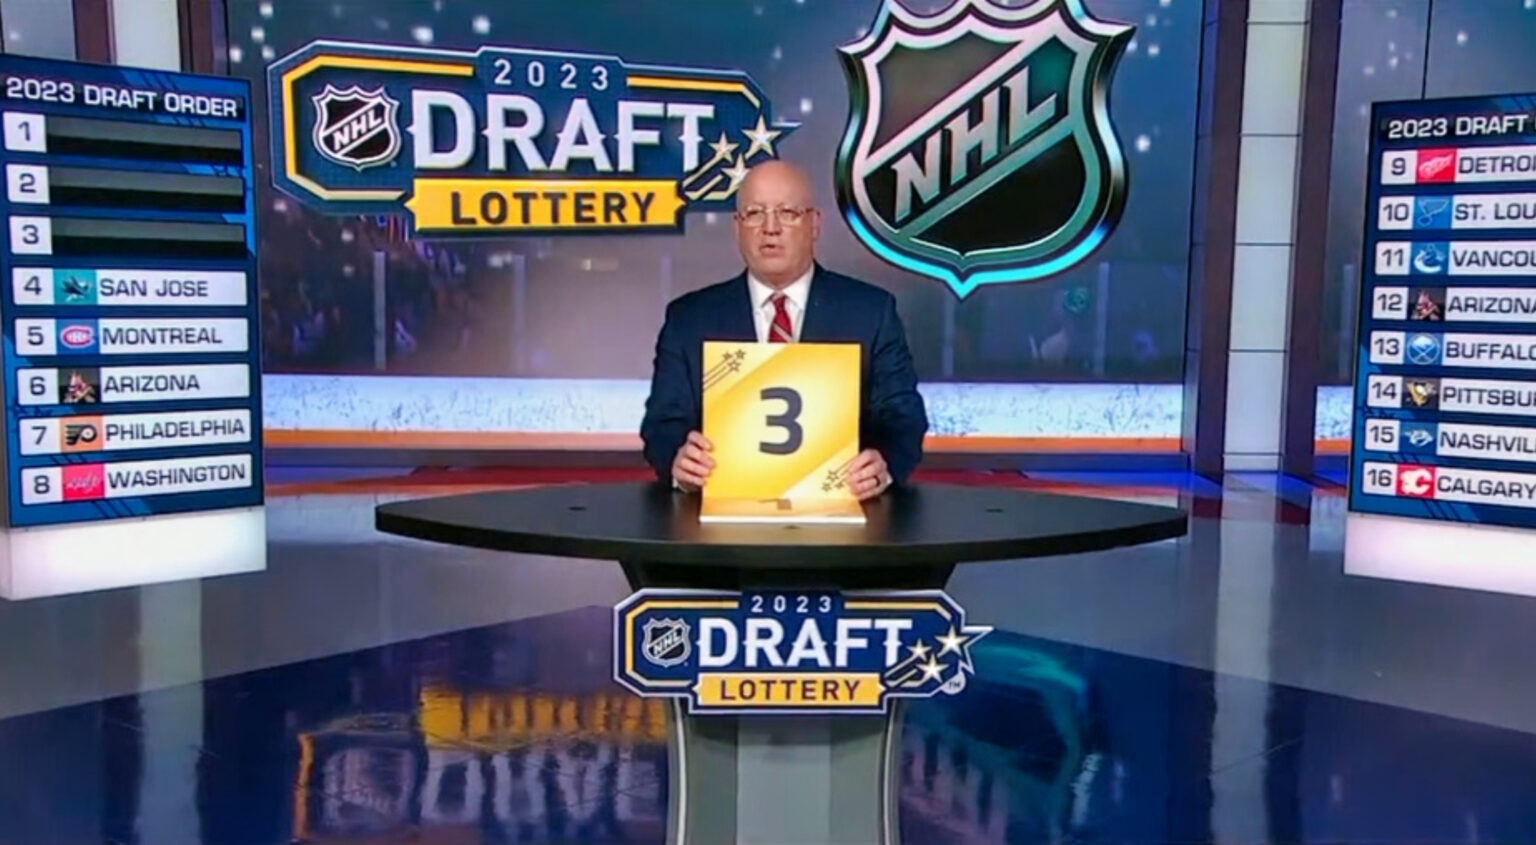 “Smart” People In NHL World Believe Draft Lottery Was Rigged